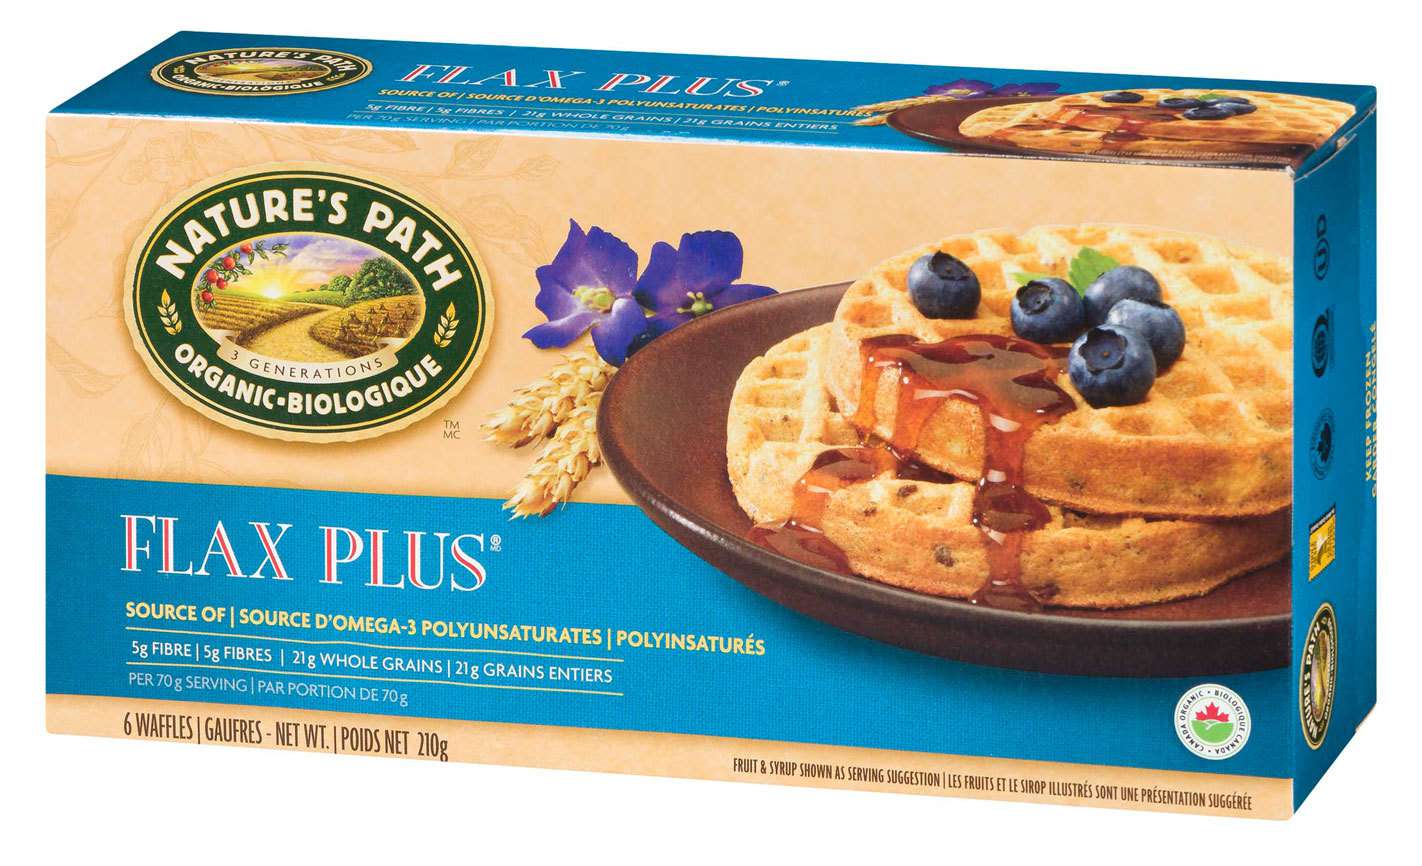 natures path brand flax plus waffles